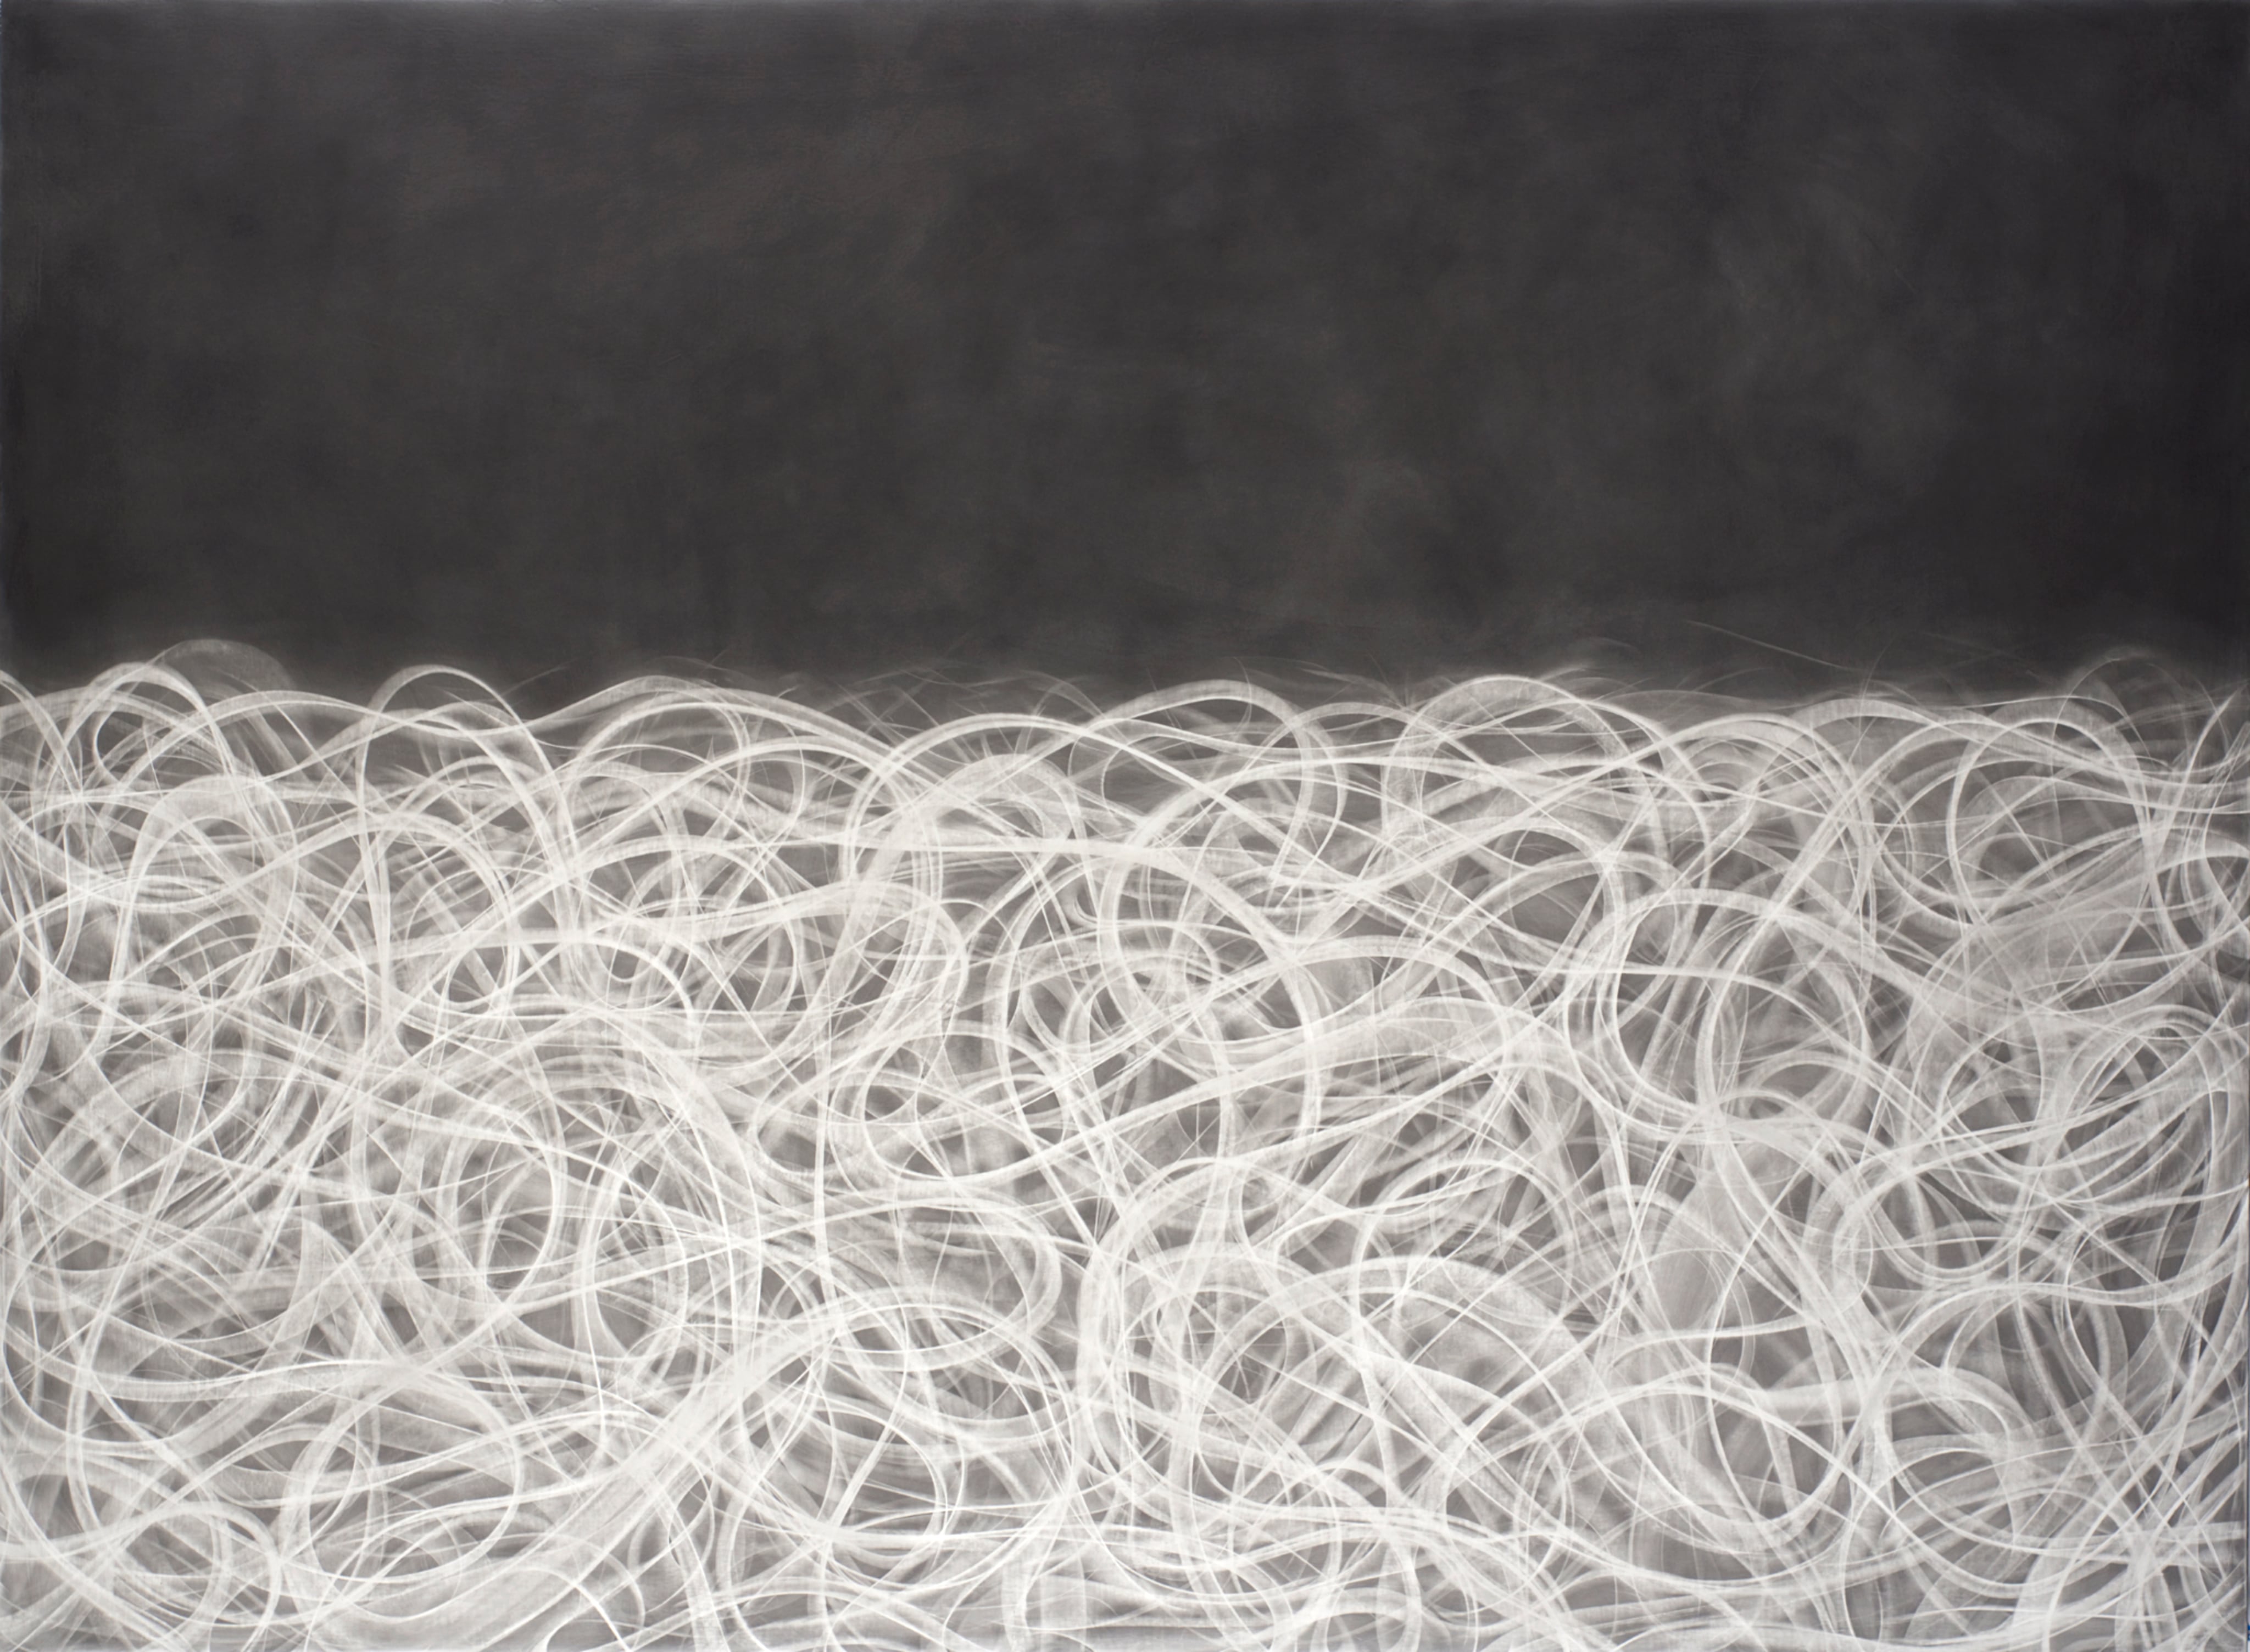 Pacific, 67 x 91 inches, 42 x 76, oil, alkyd and graphite on linen, 2014